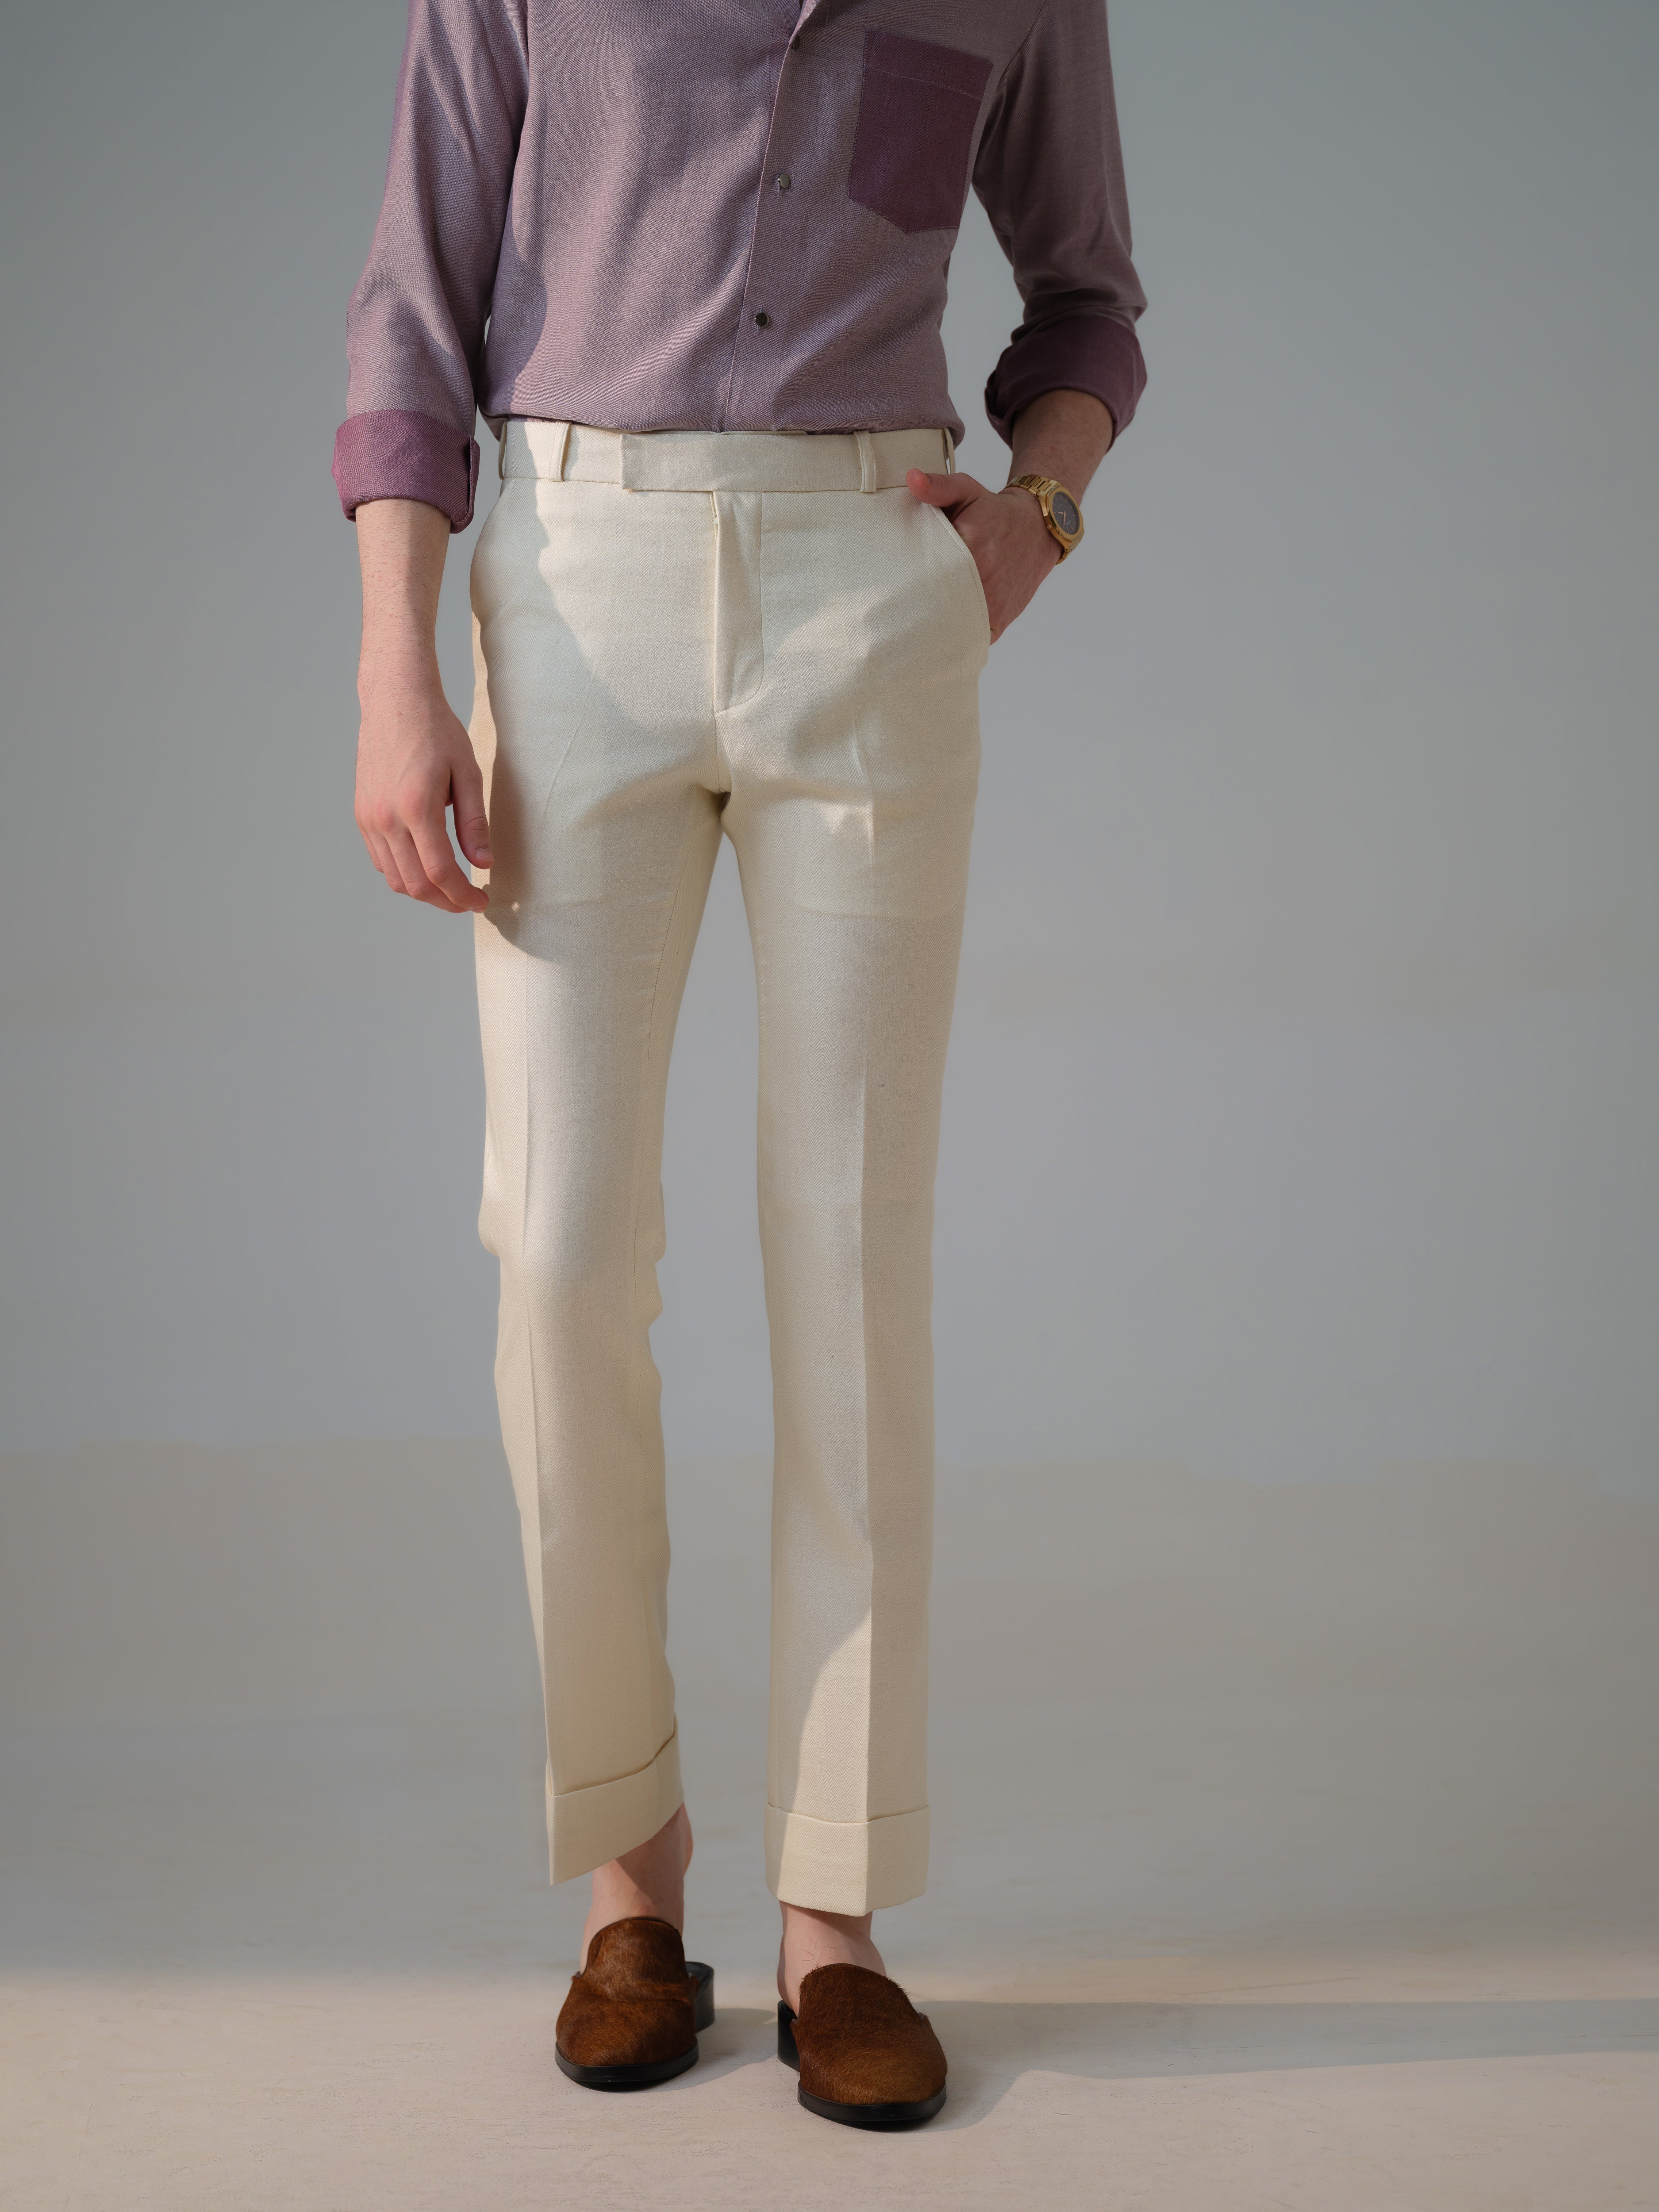 Finding and creating perfect winter wool white or ivory trousers / pants •  Save. Spend. Splurge.